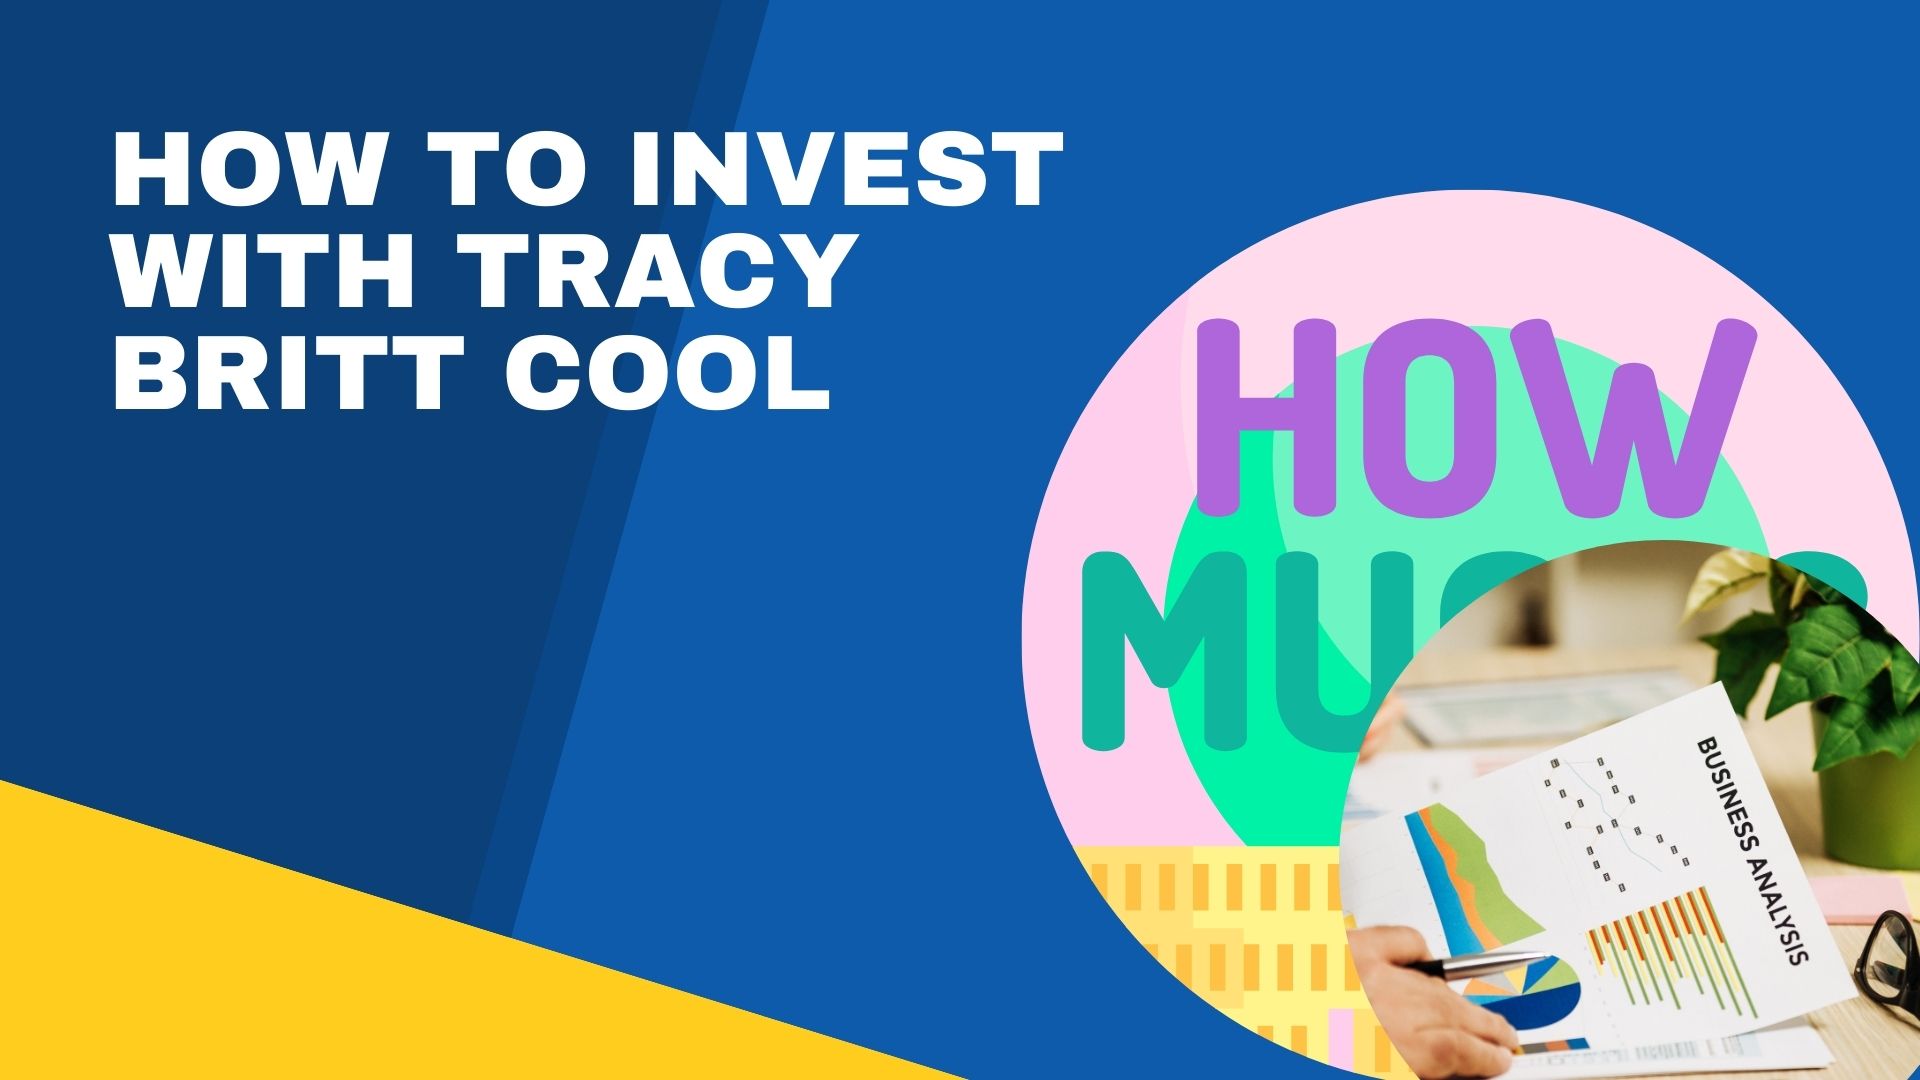 How to Invest With Tracy Britt Cool